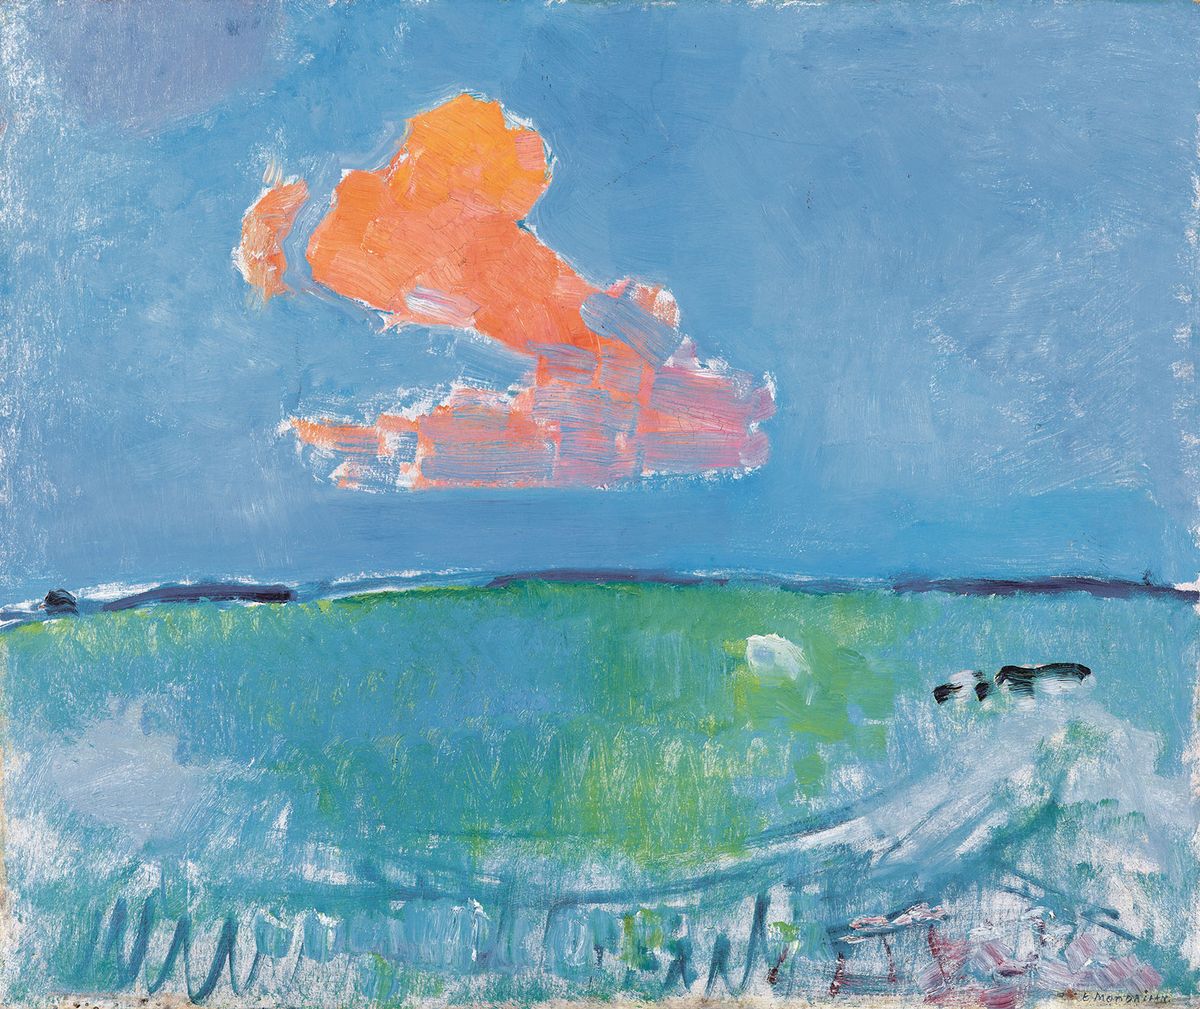 Piet Mondrian’s The Red Cloud (1907), which rarely travels from its home in The Hague, is on show at Fondation Beyeler © 2022 Mondrian/Holtzman Trust. Photo: Kunstmuseum Den Haag